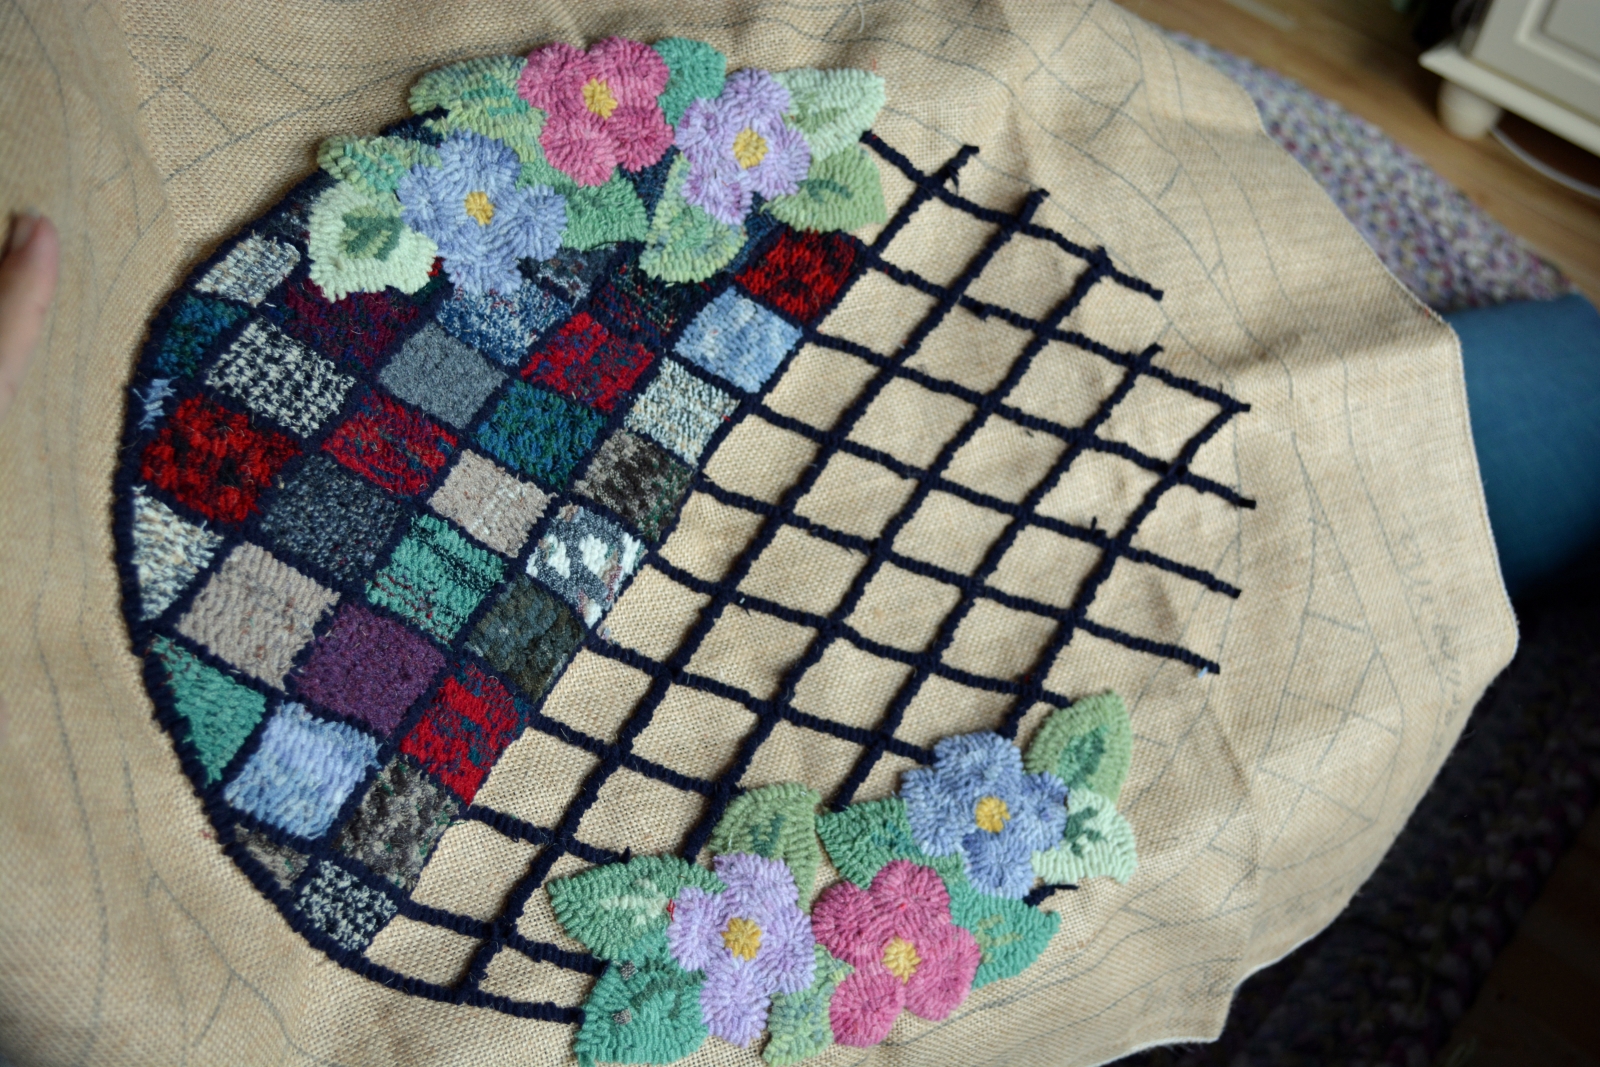 Grandmother's Hooked Rug by Janet Bocciardi